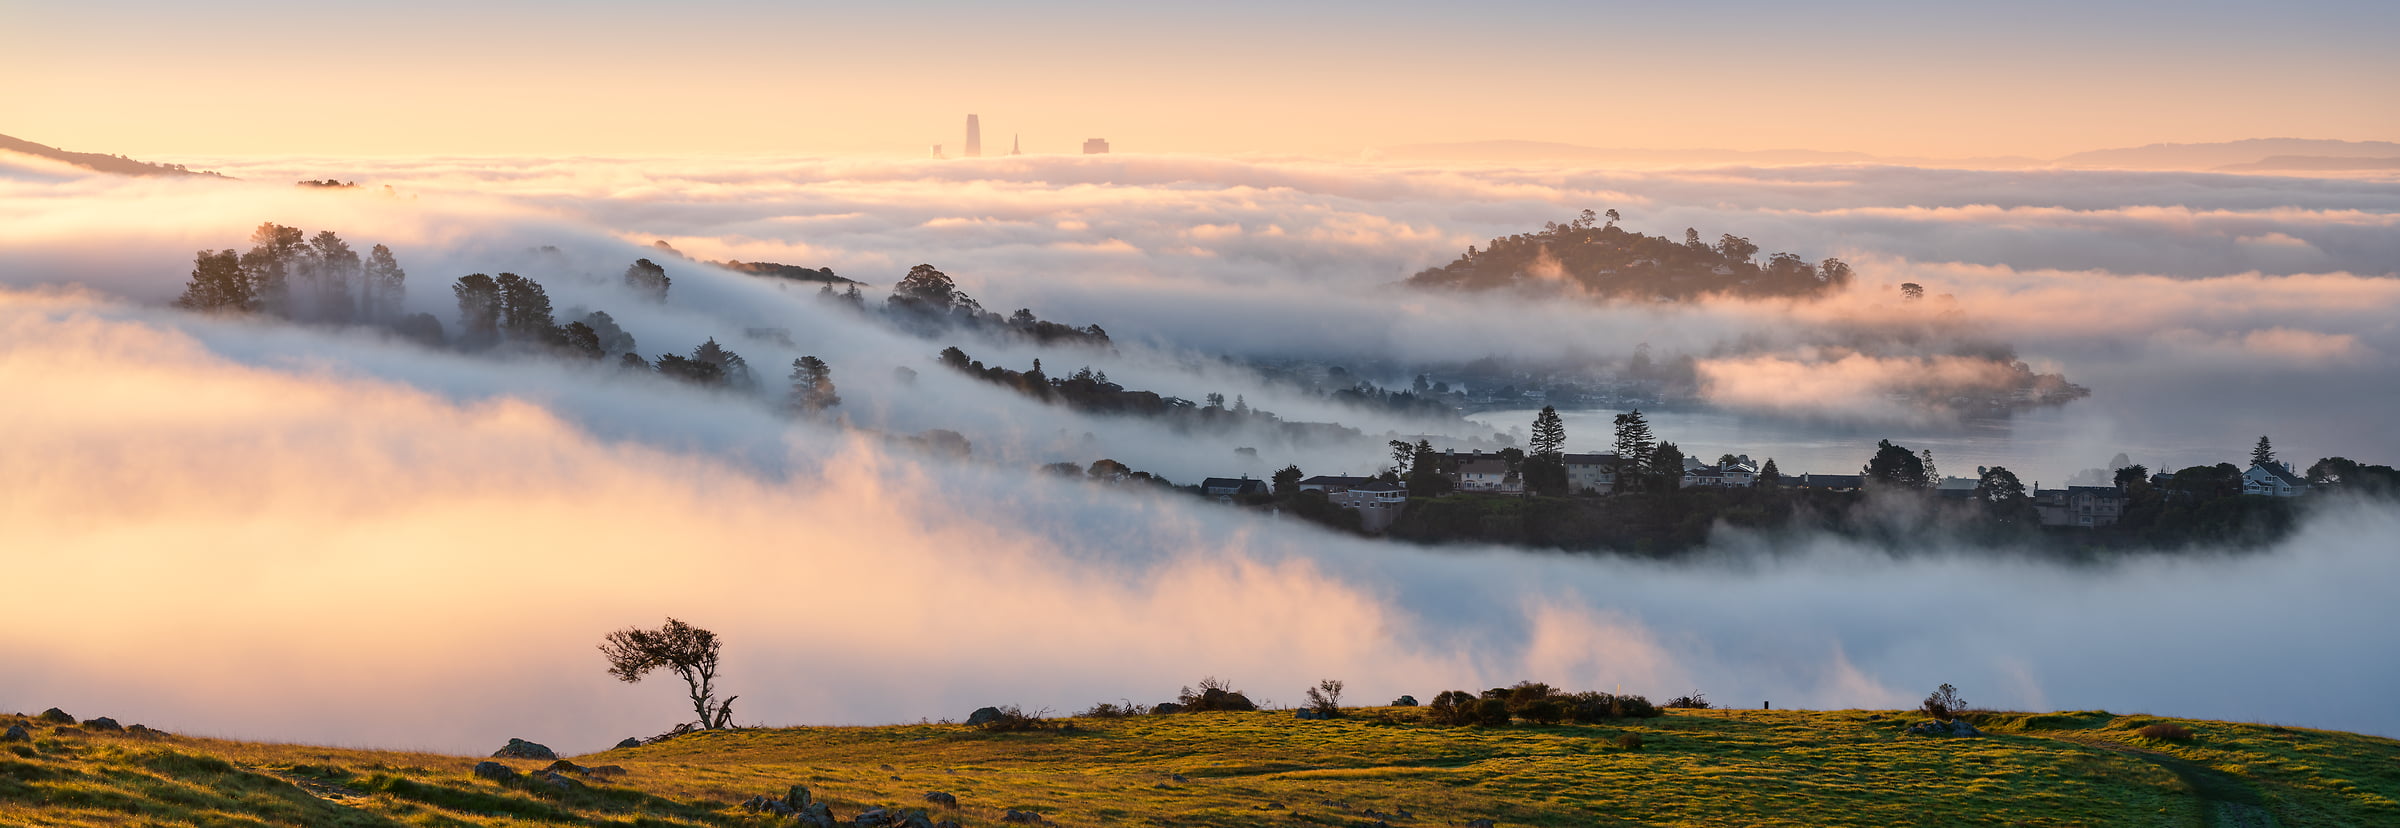 116 megapixels! A very high resolution, art decor photo print of a San Francisco landscape; photograph created by Jeff Lewis near San Francisco in Marin County, California.